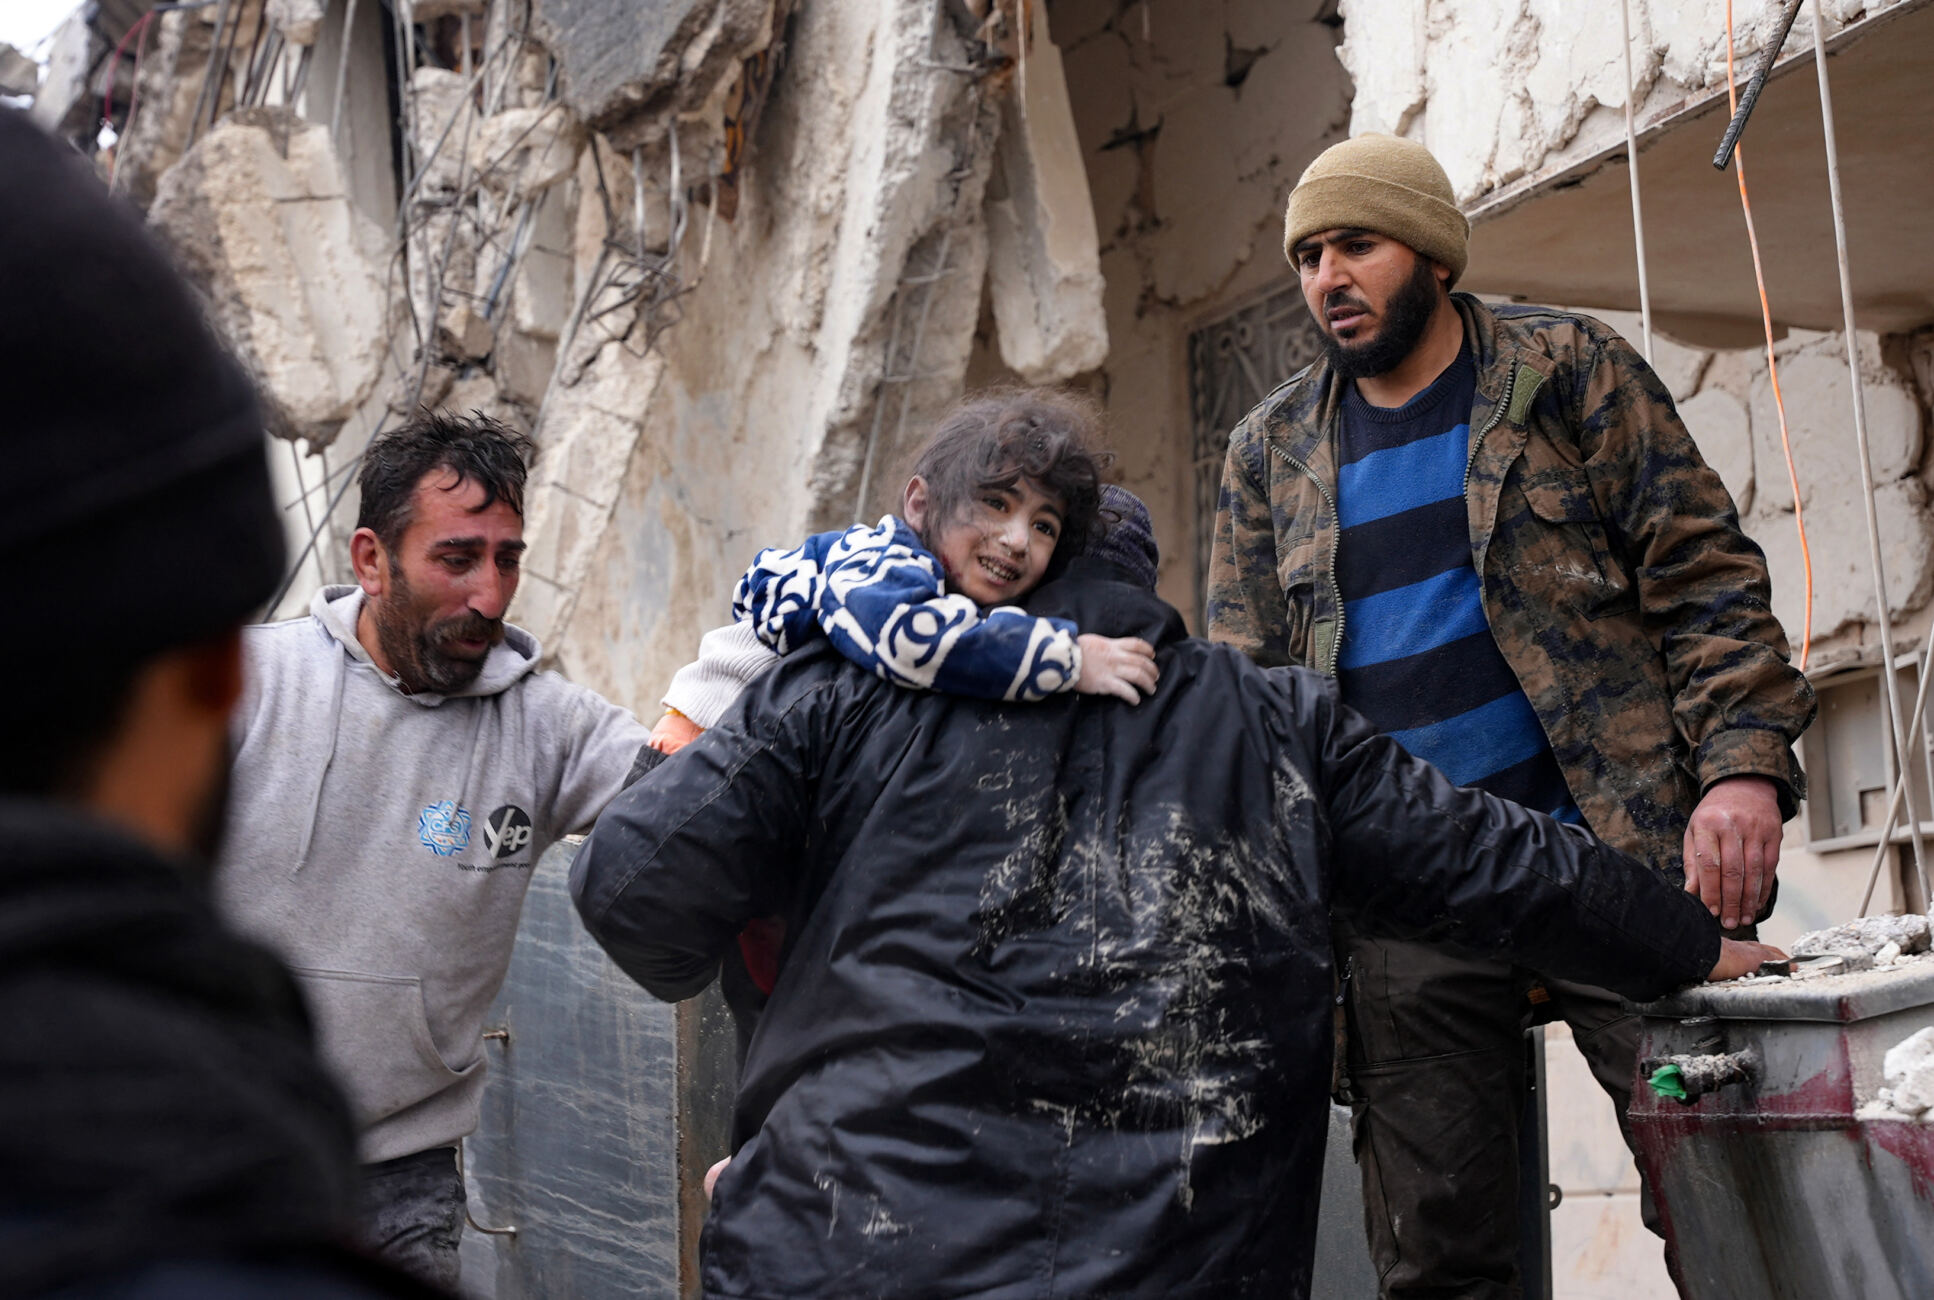 Child carried from the rubble of a collapsed building following the earthquake in Syria